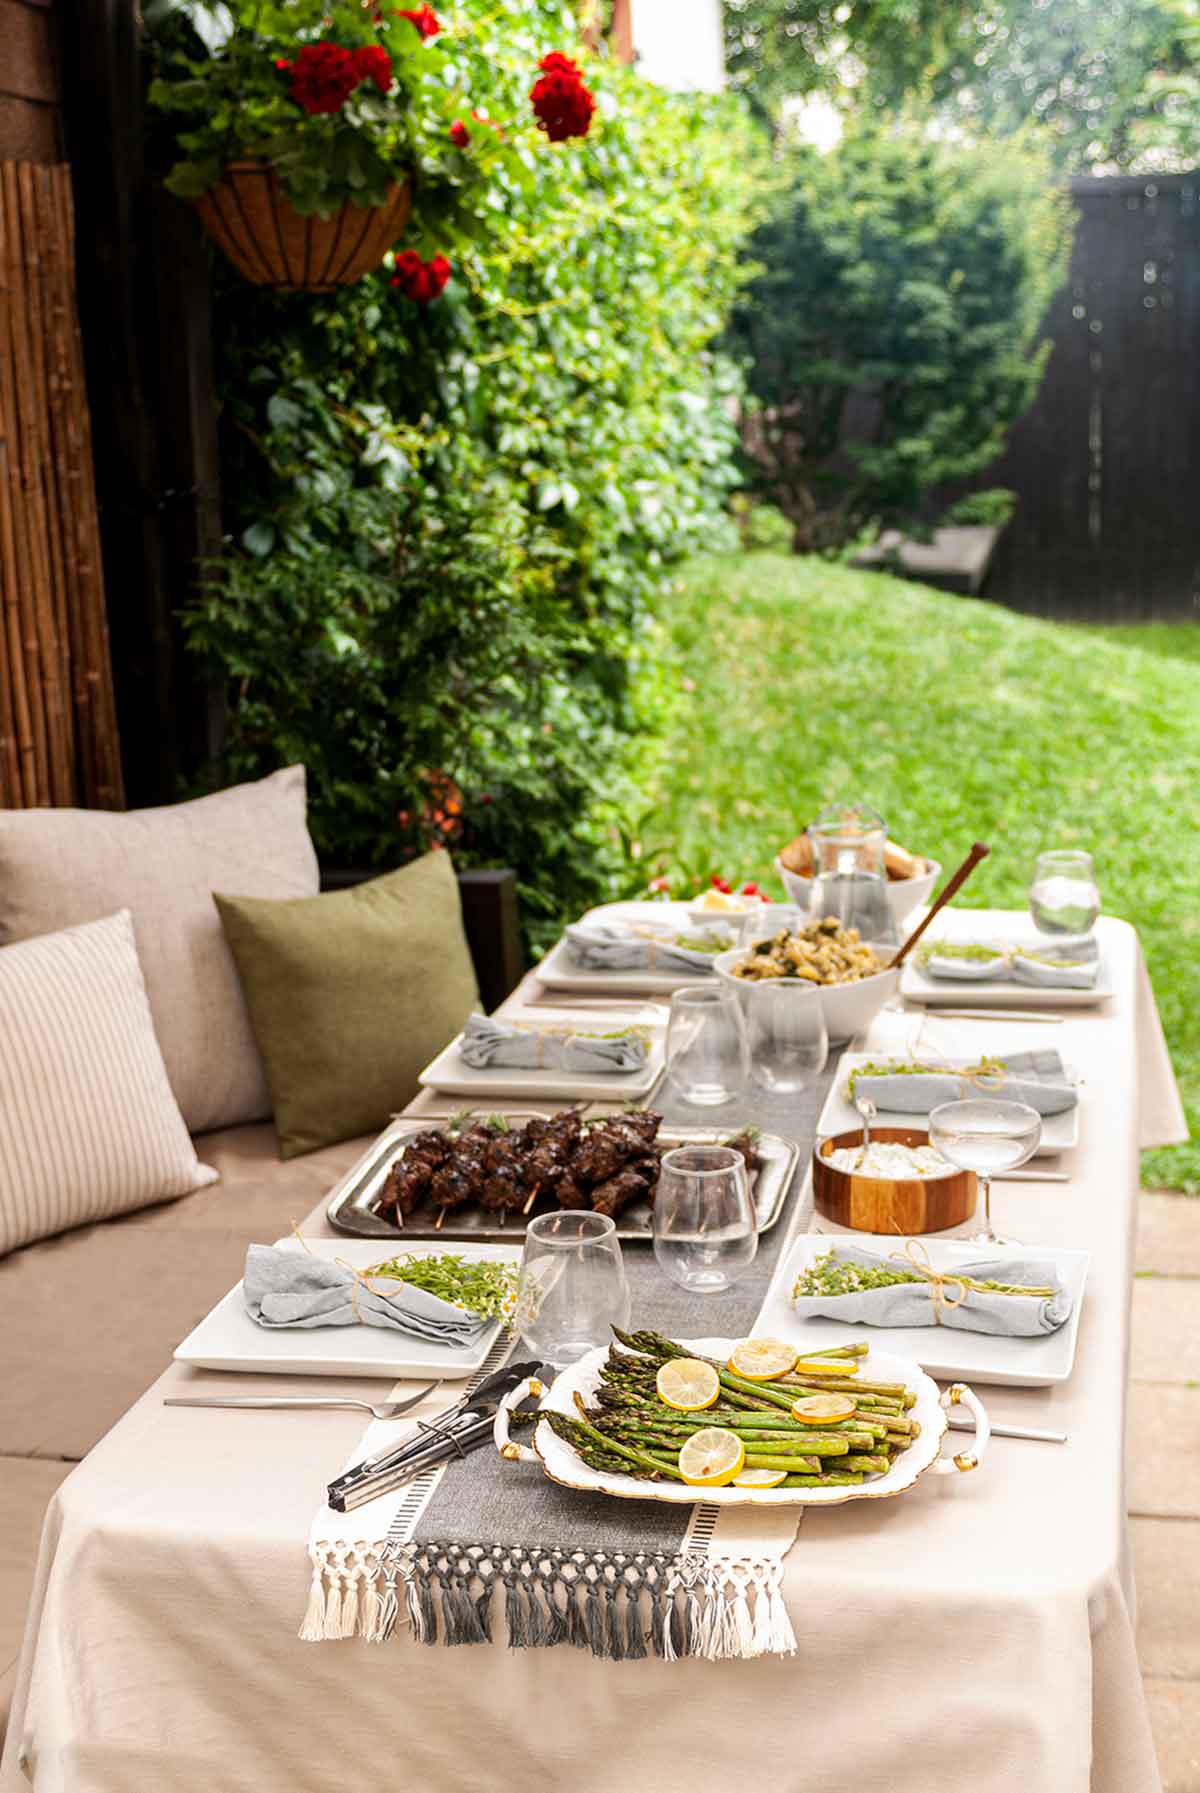 A table in a back yard garden with seasonal food on the table cloth of a table.